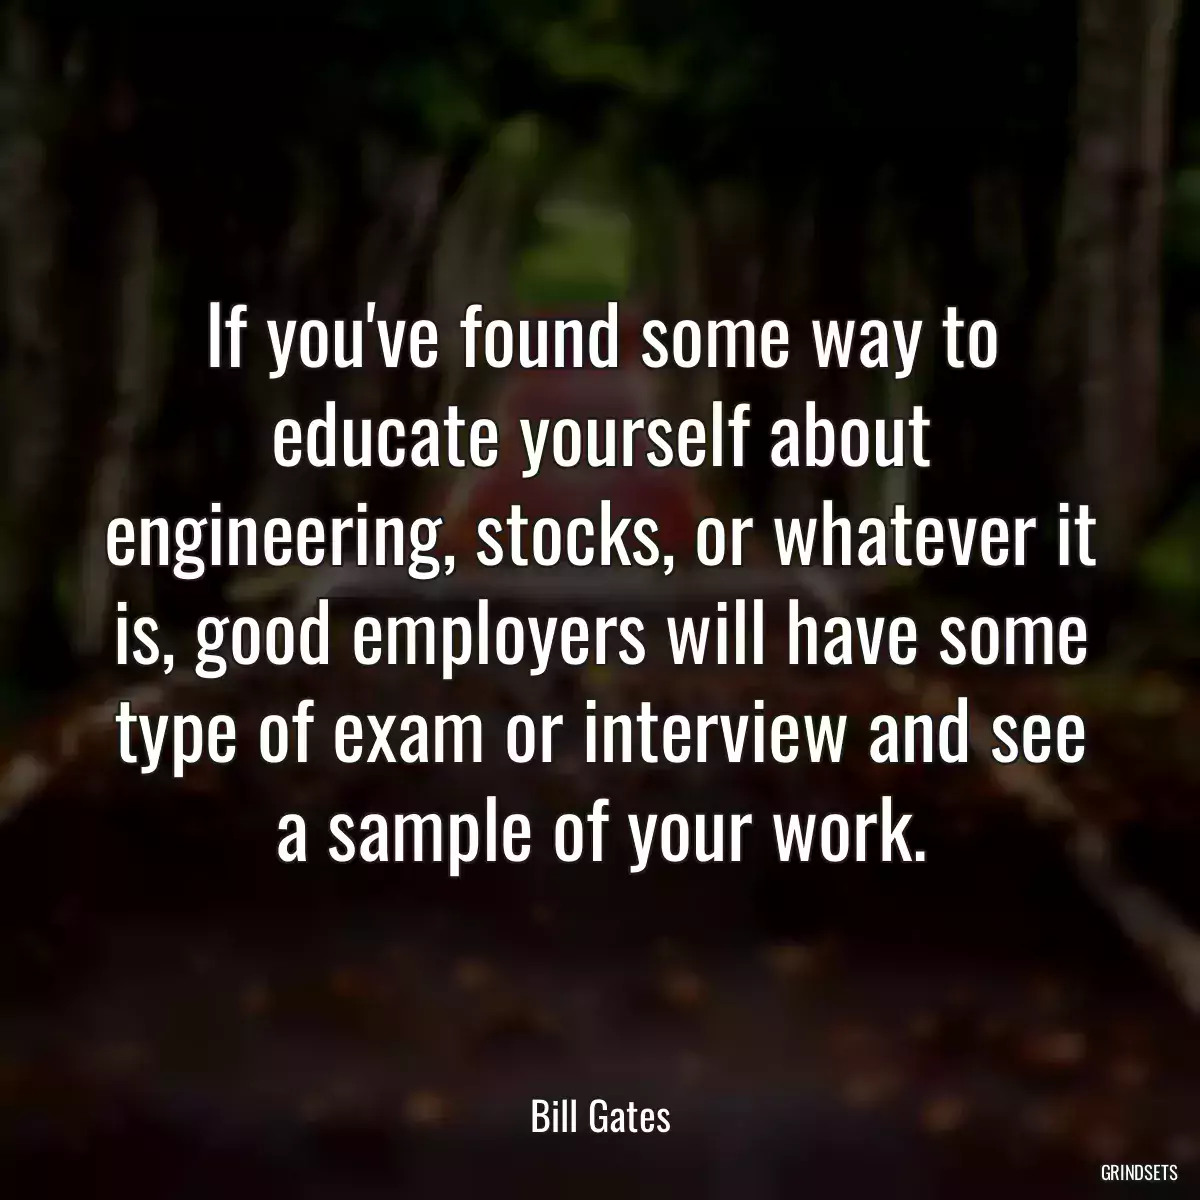 If you\'ve found some way to educate yourself about engineering, stocks, or whatever it is, good employers will have some type of exam or interview and see a sample of your work.